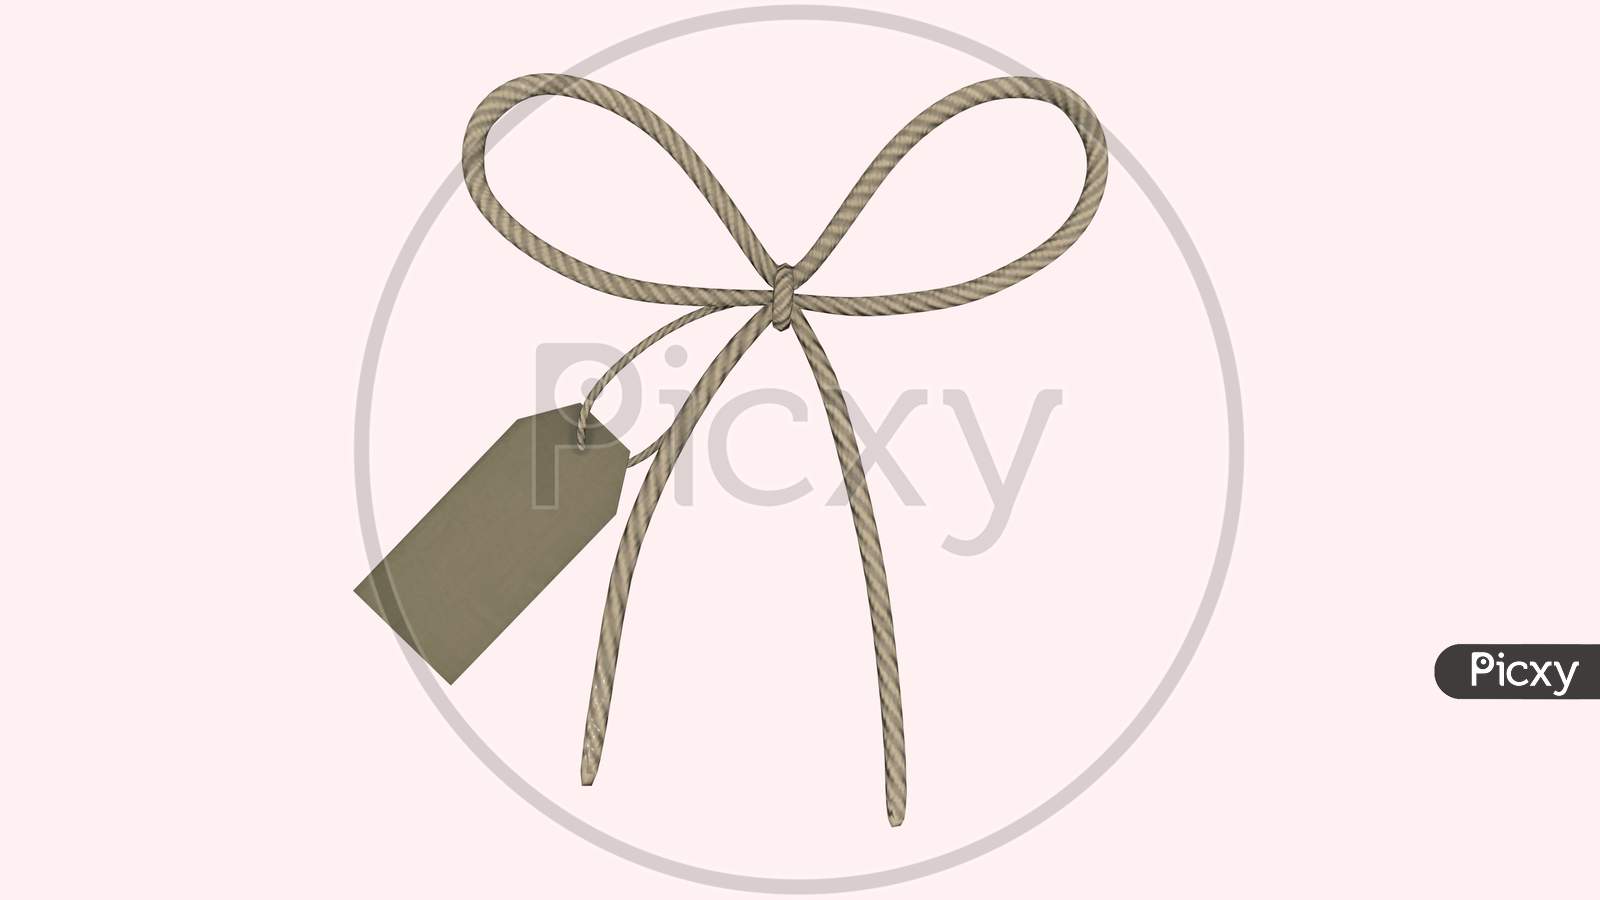 3D Render Price Tag With Rope Twine String Tied On Pink Background